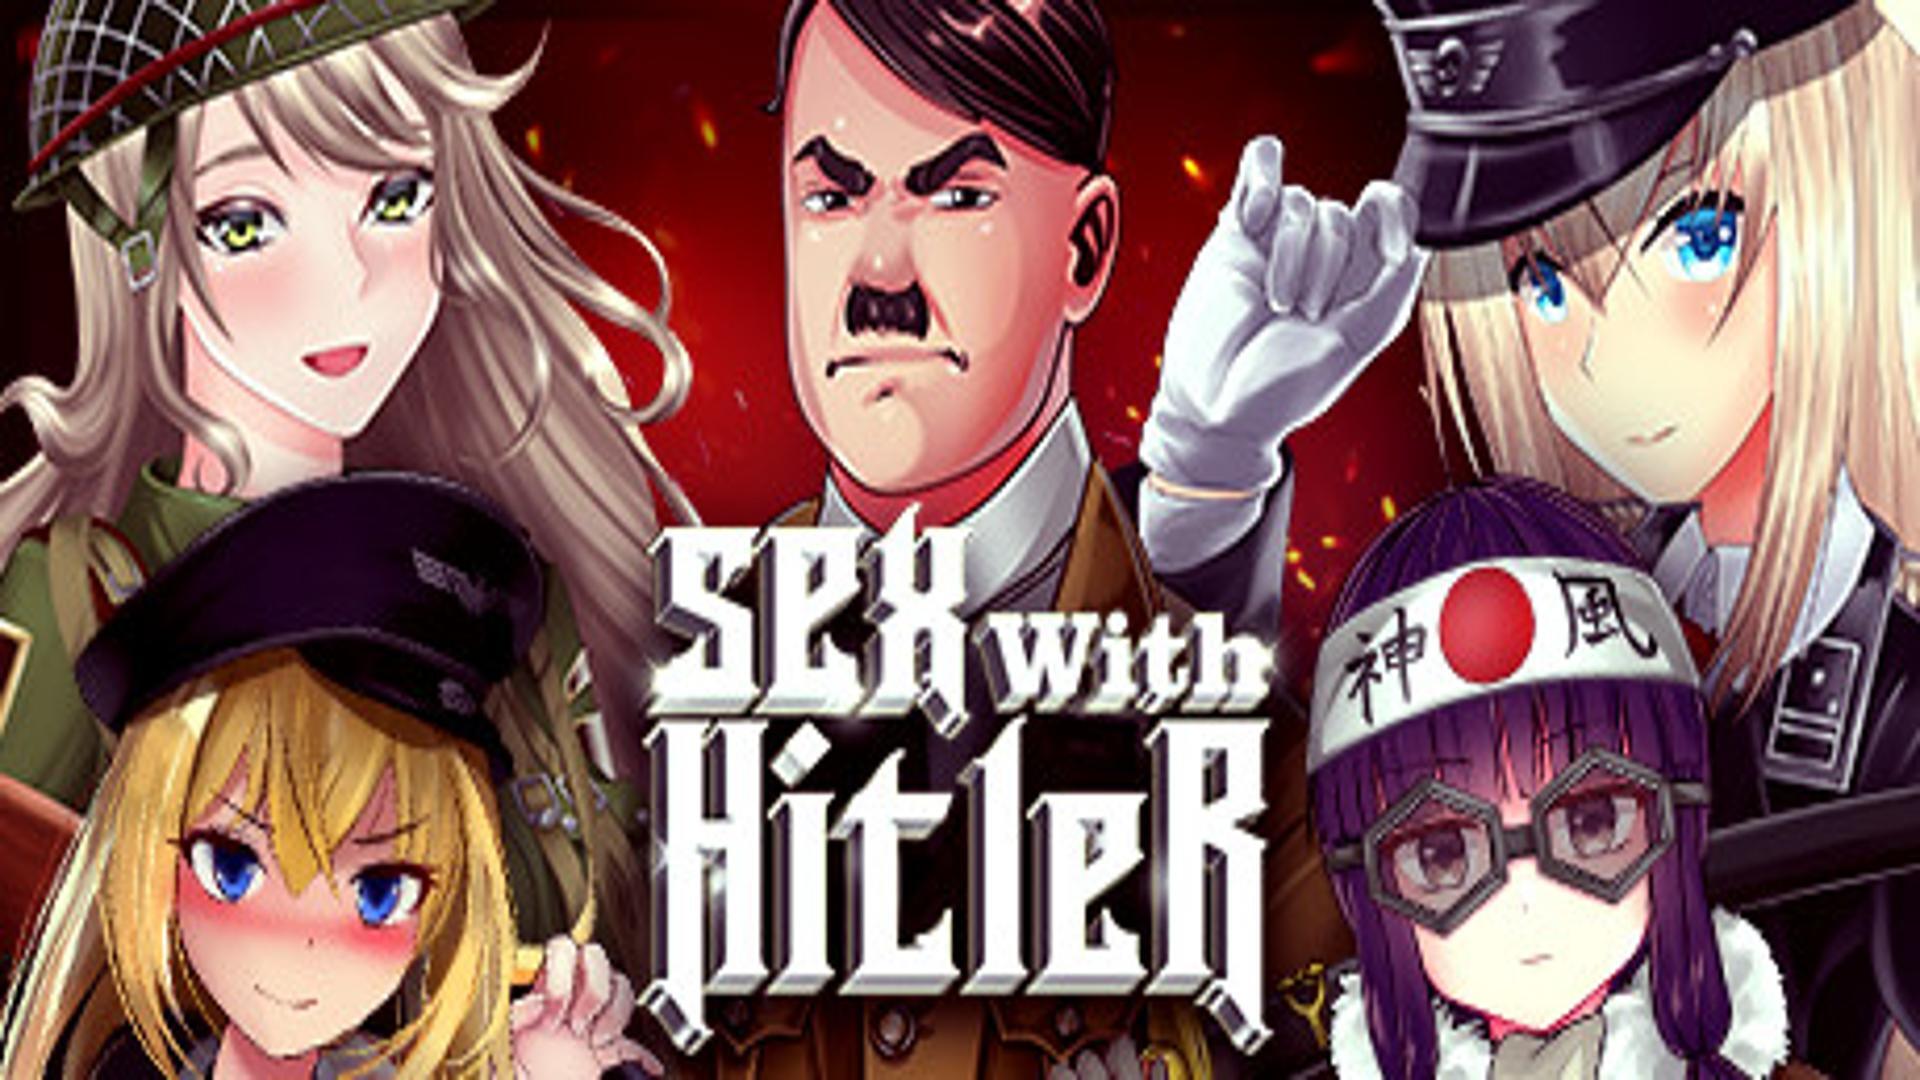 SEX with HITLER- Free Download (Build 8076101 )